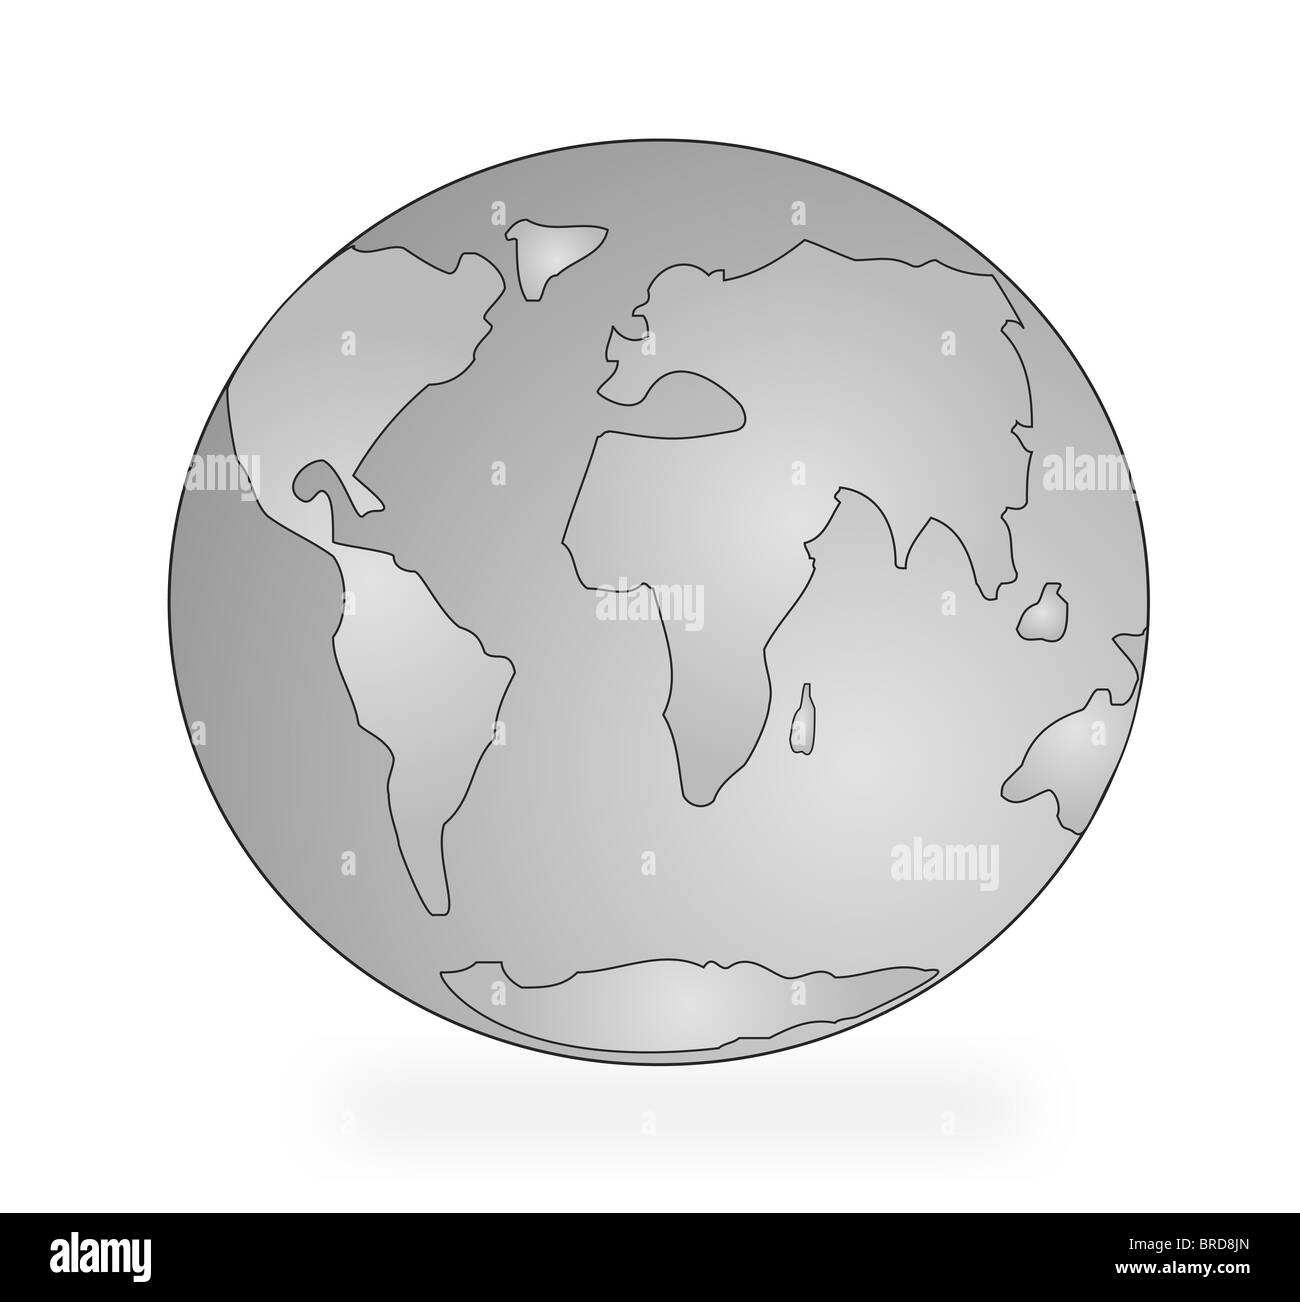 A stylized earth in grey tone. All isolated on white background. Stock Photo